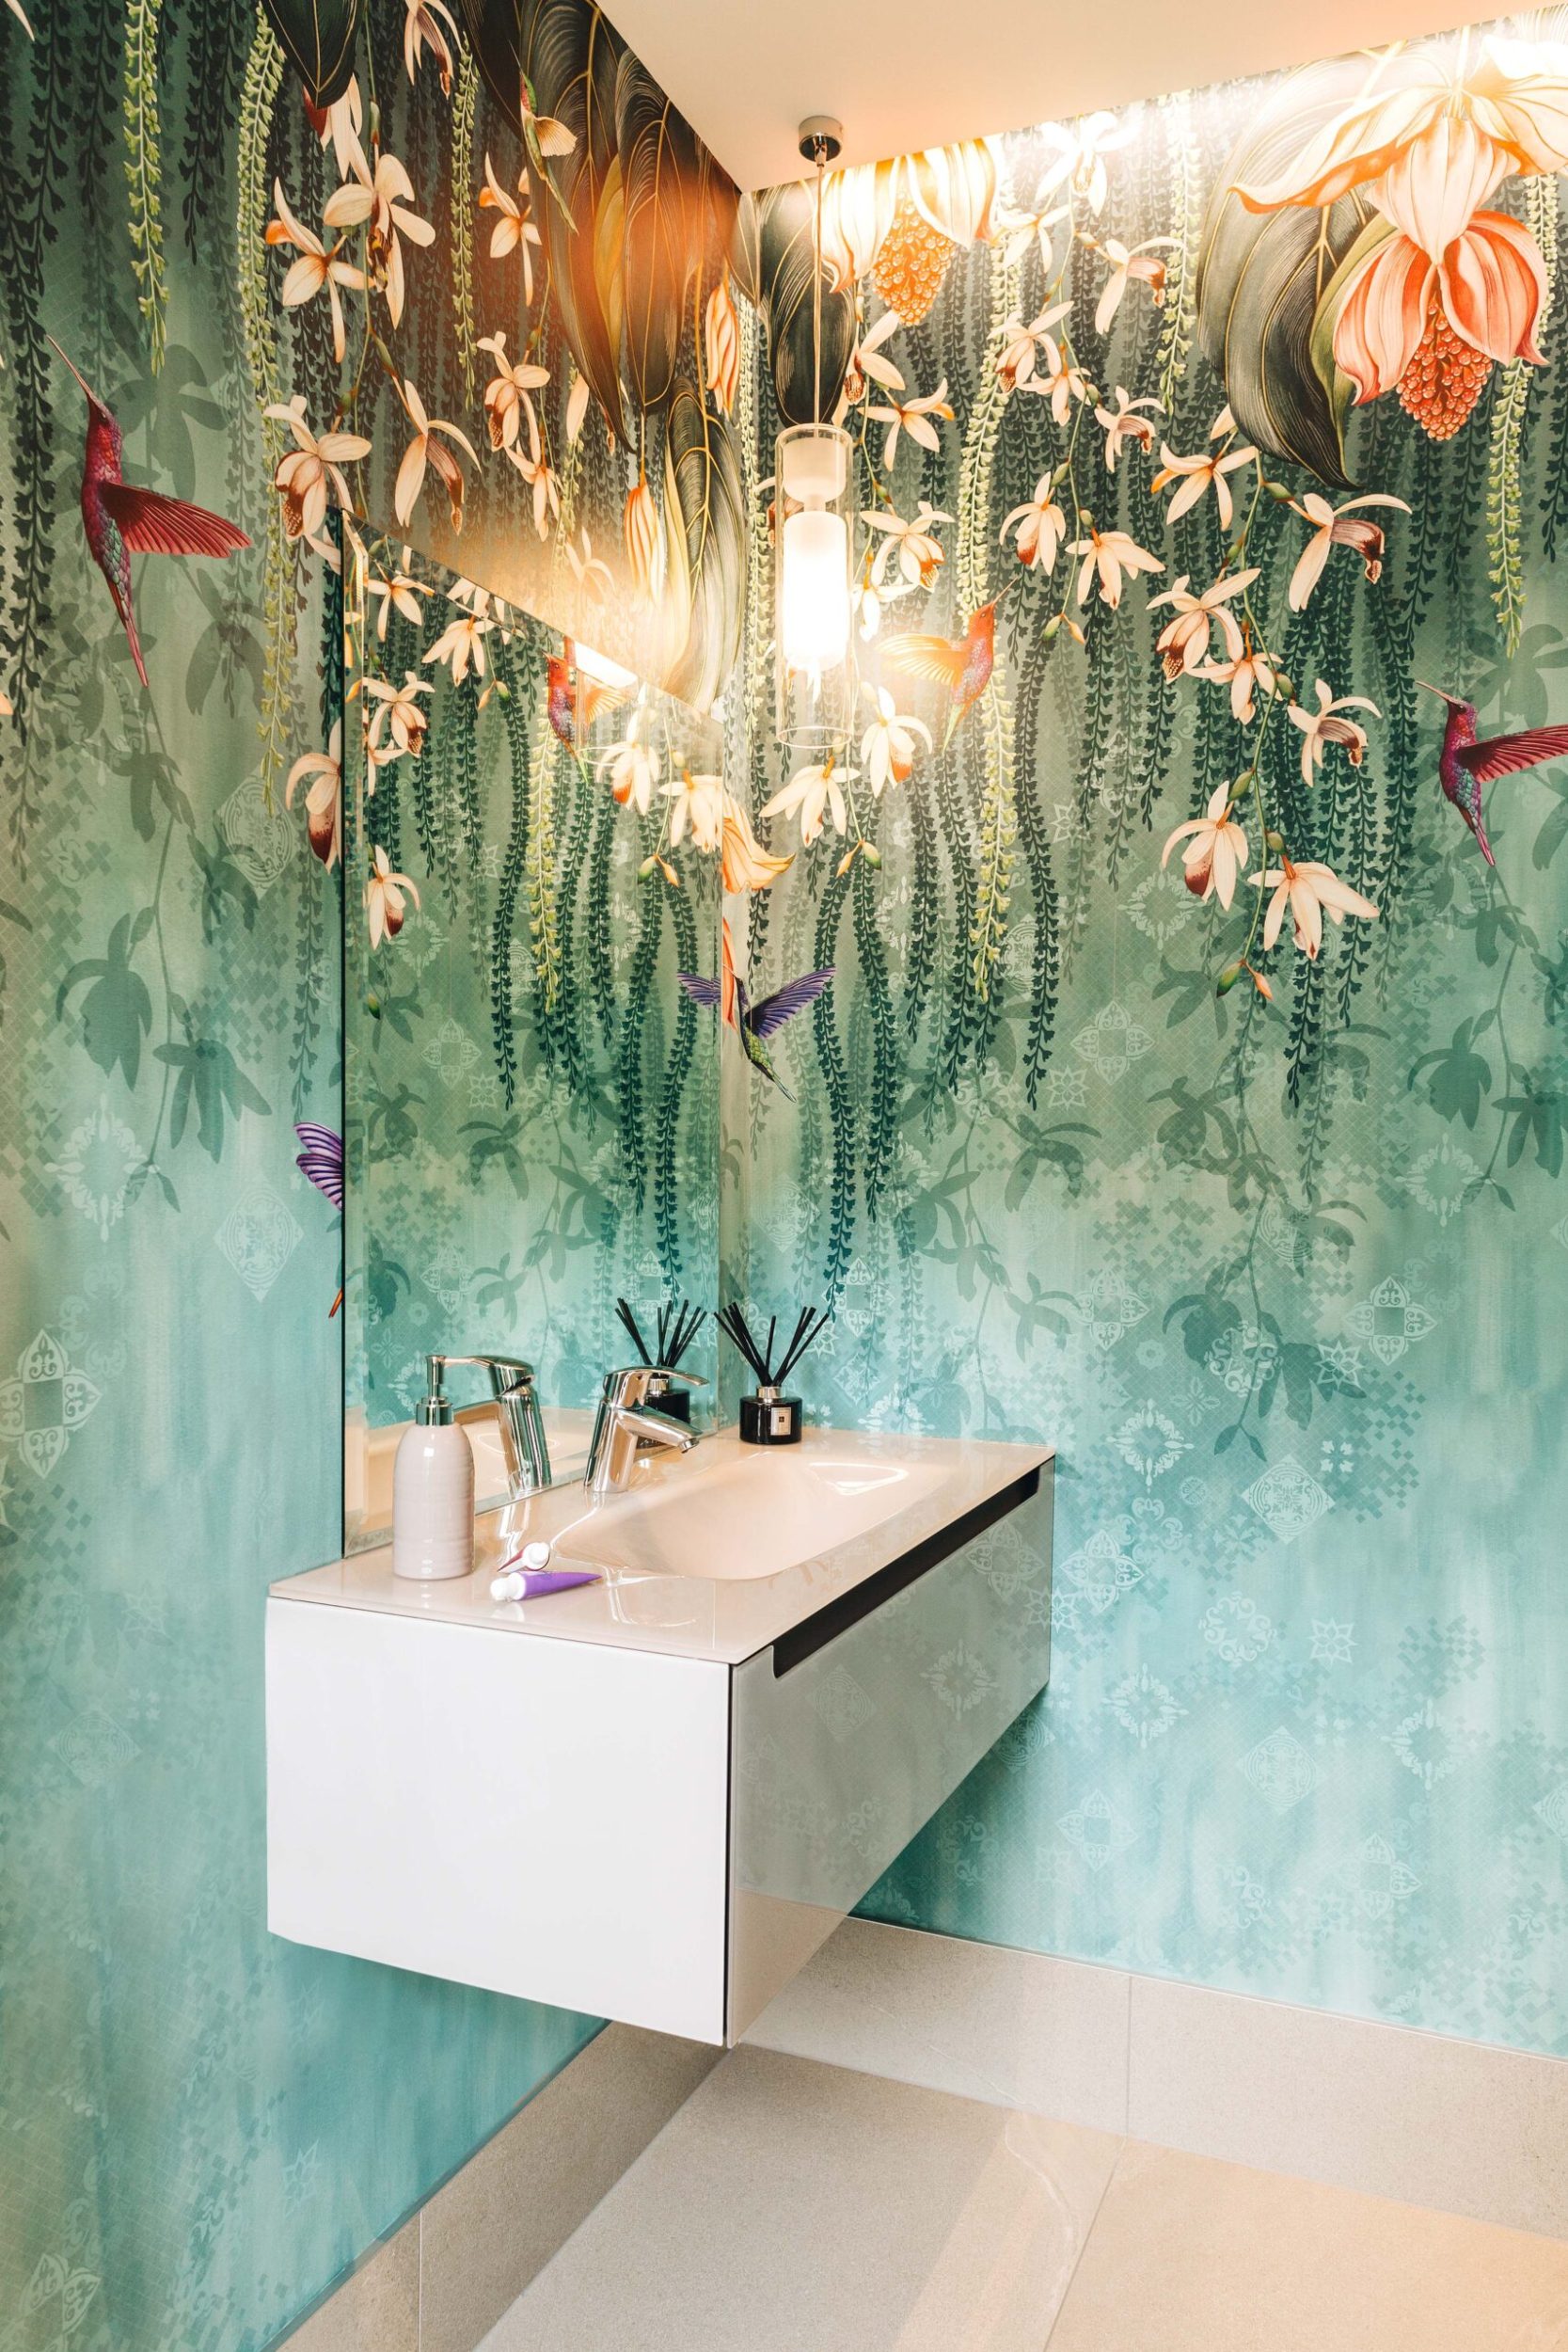 A bathroom with a green and floral patterned Osborne & Little  ‘Trailing Orchid’ wallpaper